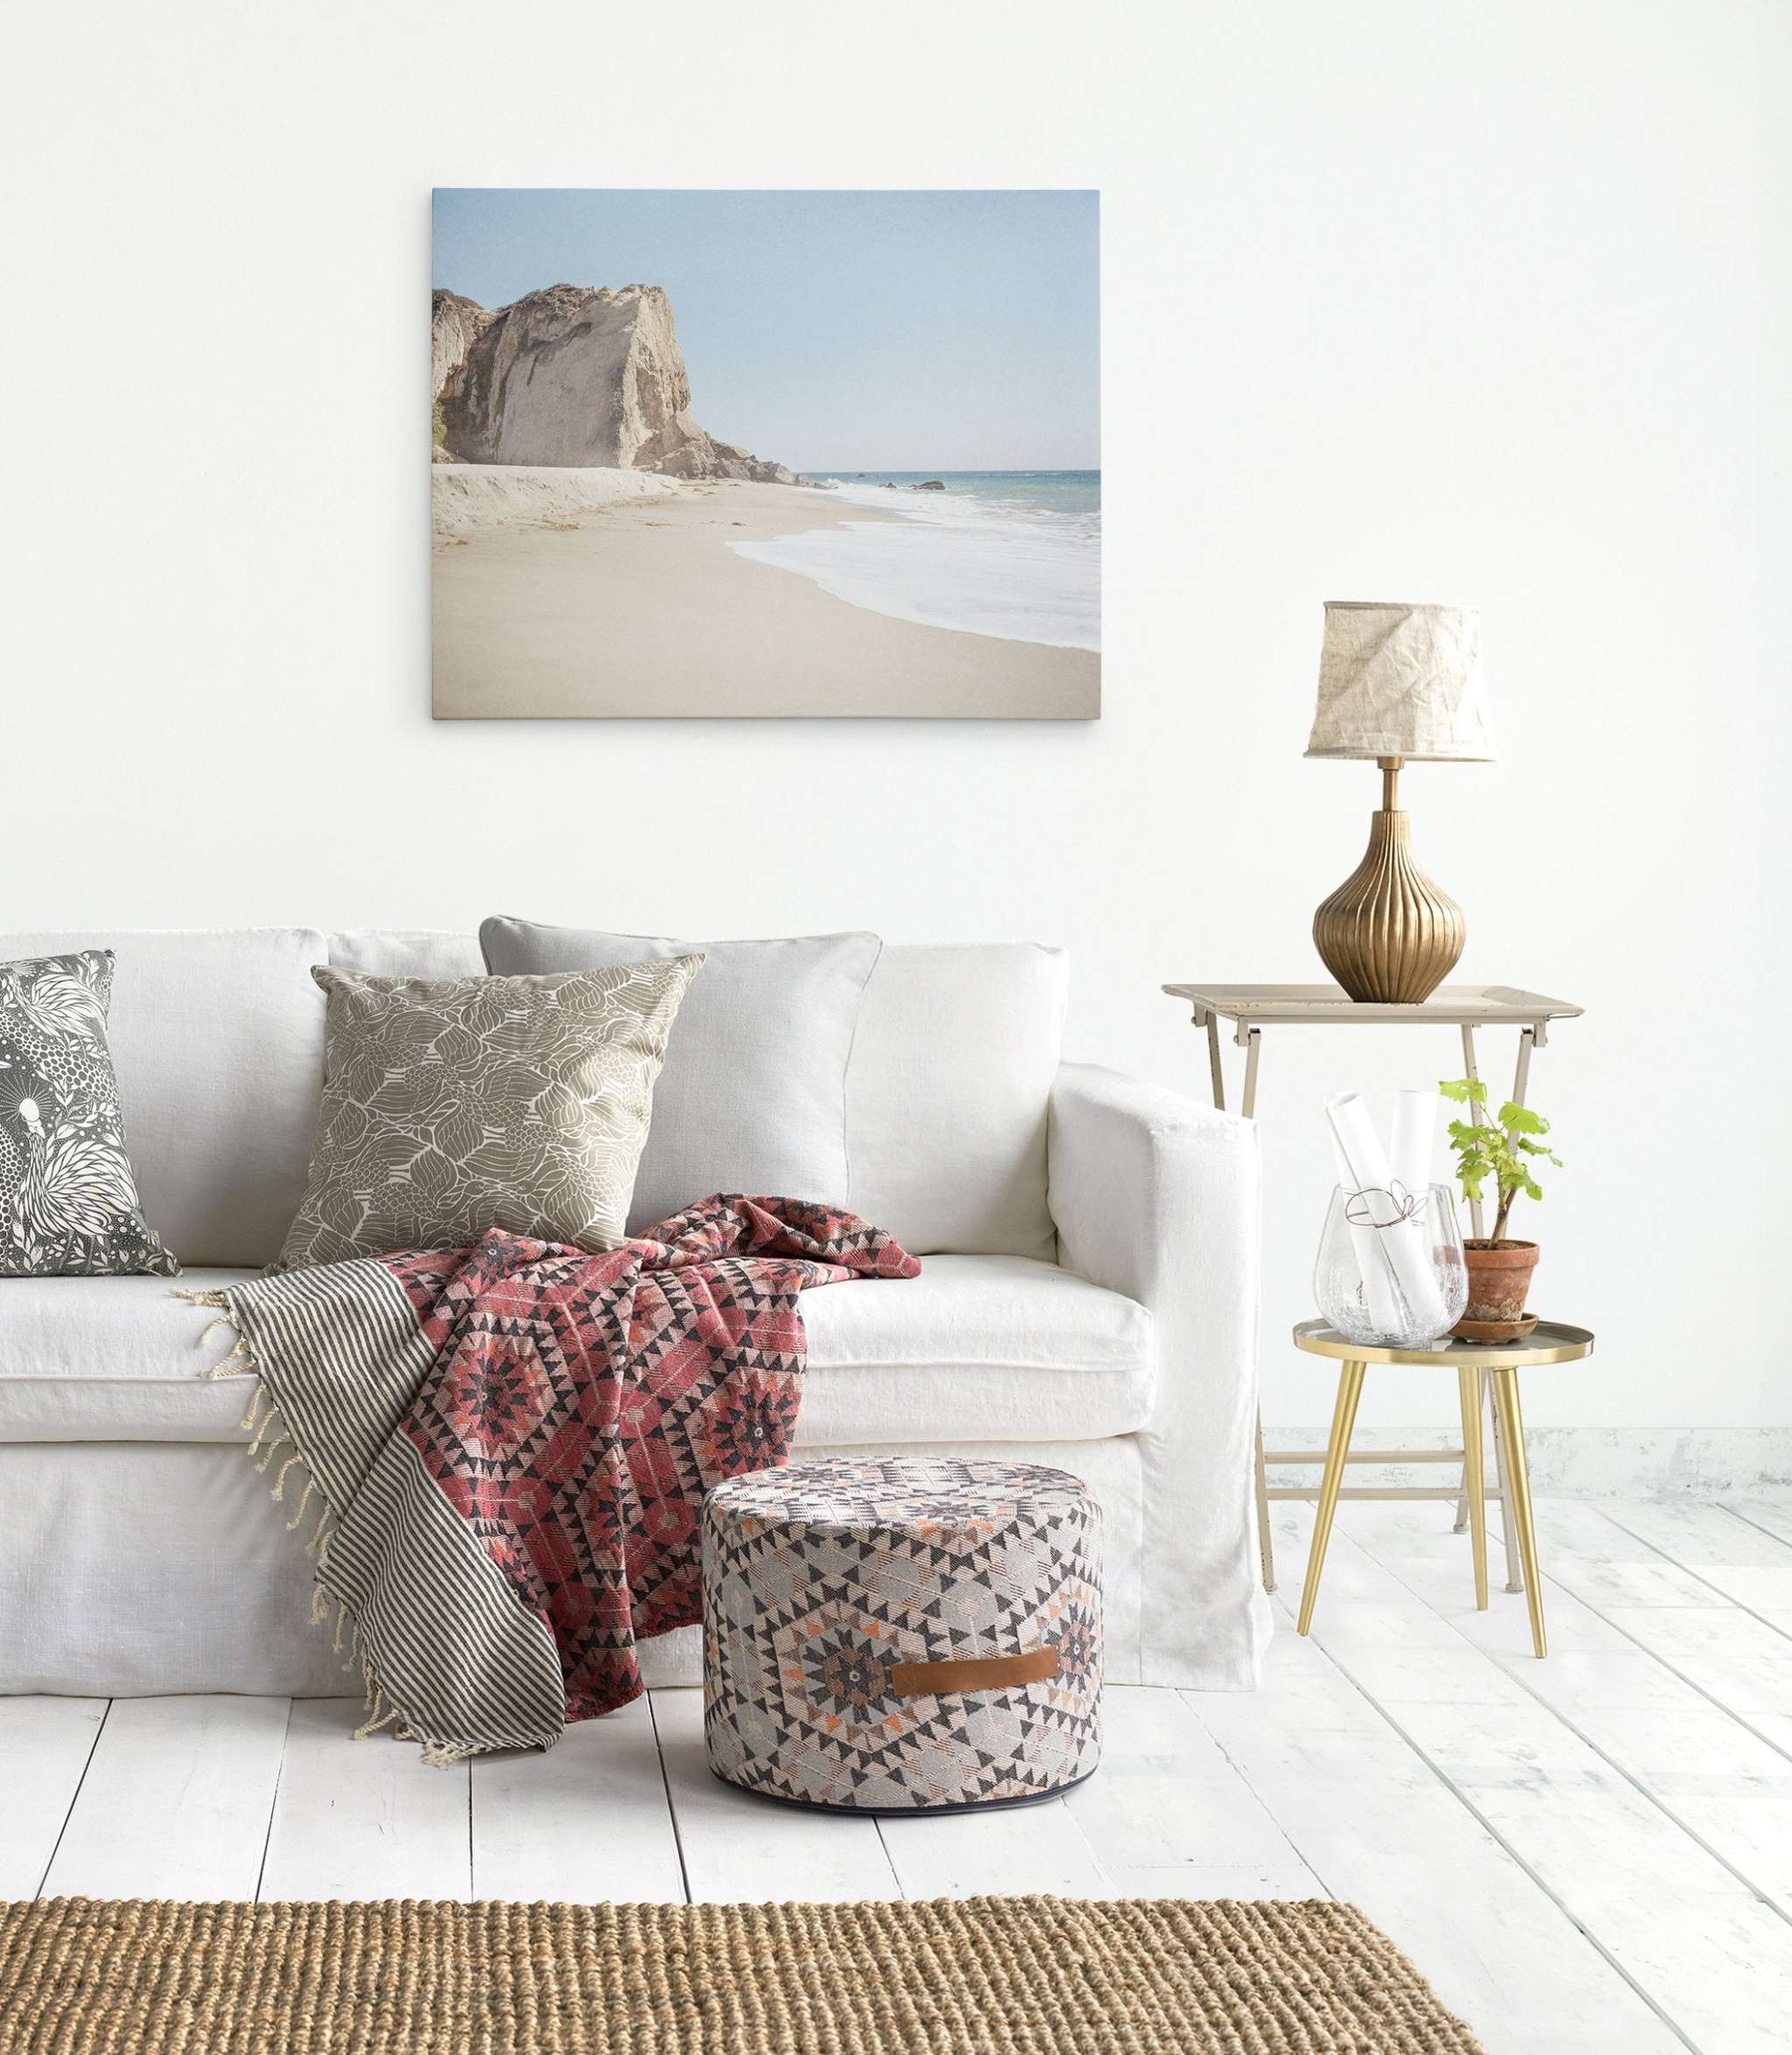 A cozy, light-filled living room features a white sofa adorned with patterned cushions and a red, geometric throw. An Offley Green California Malibu Canvas Wall Art, 'Point Dume' hangs on the white wall above. A small side table with a plant and vase, and a patterned pouf complete the decor.